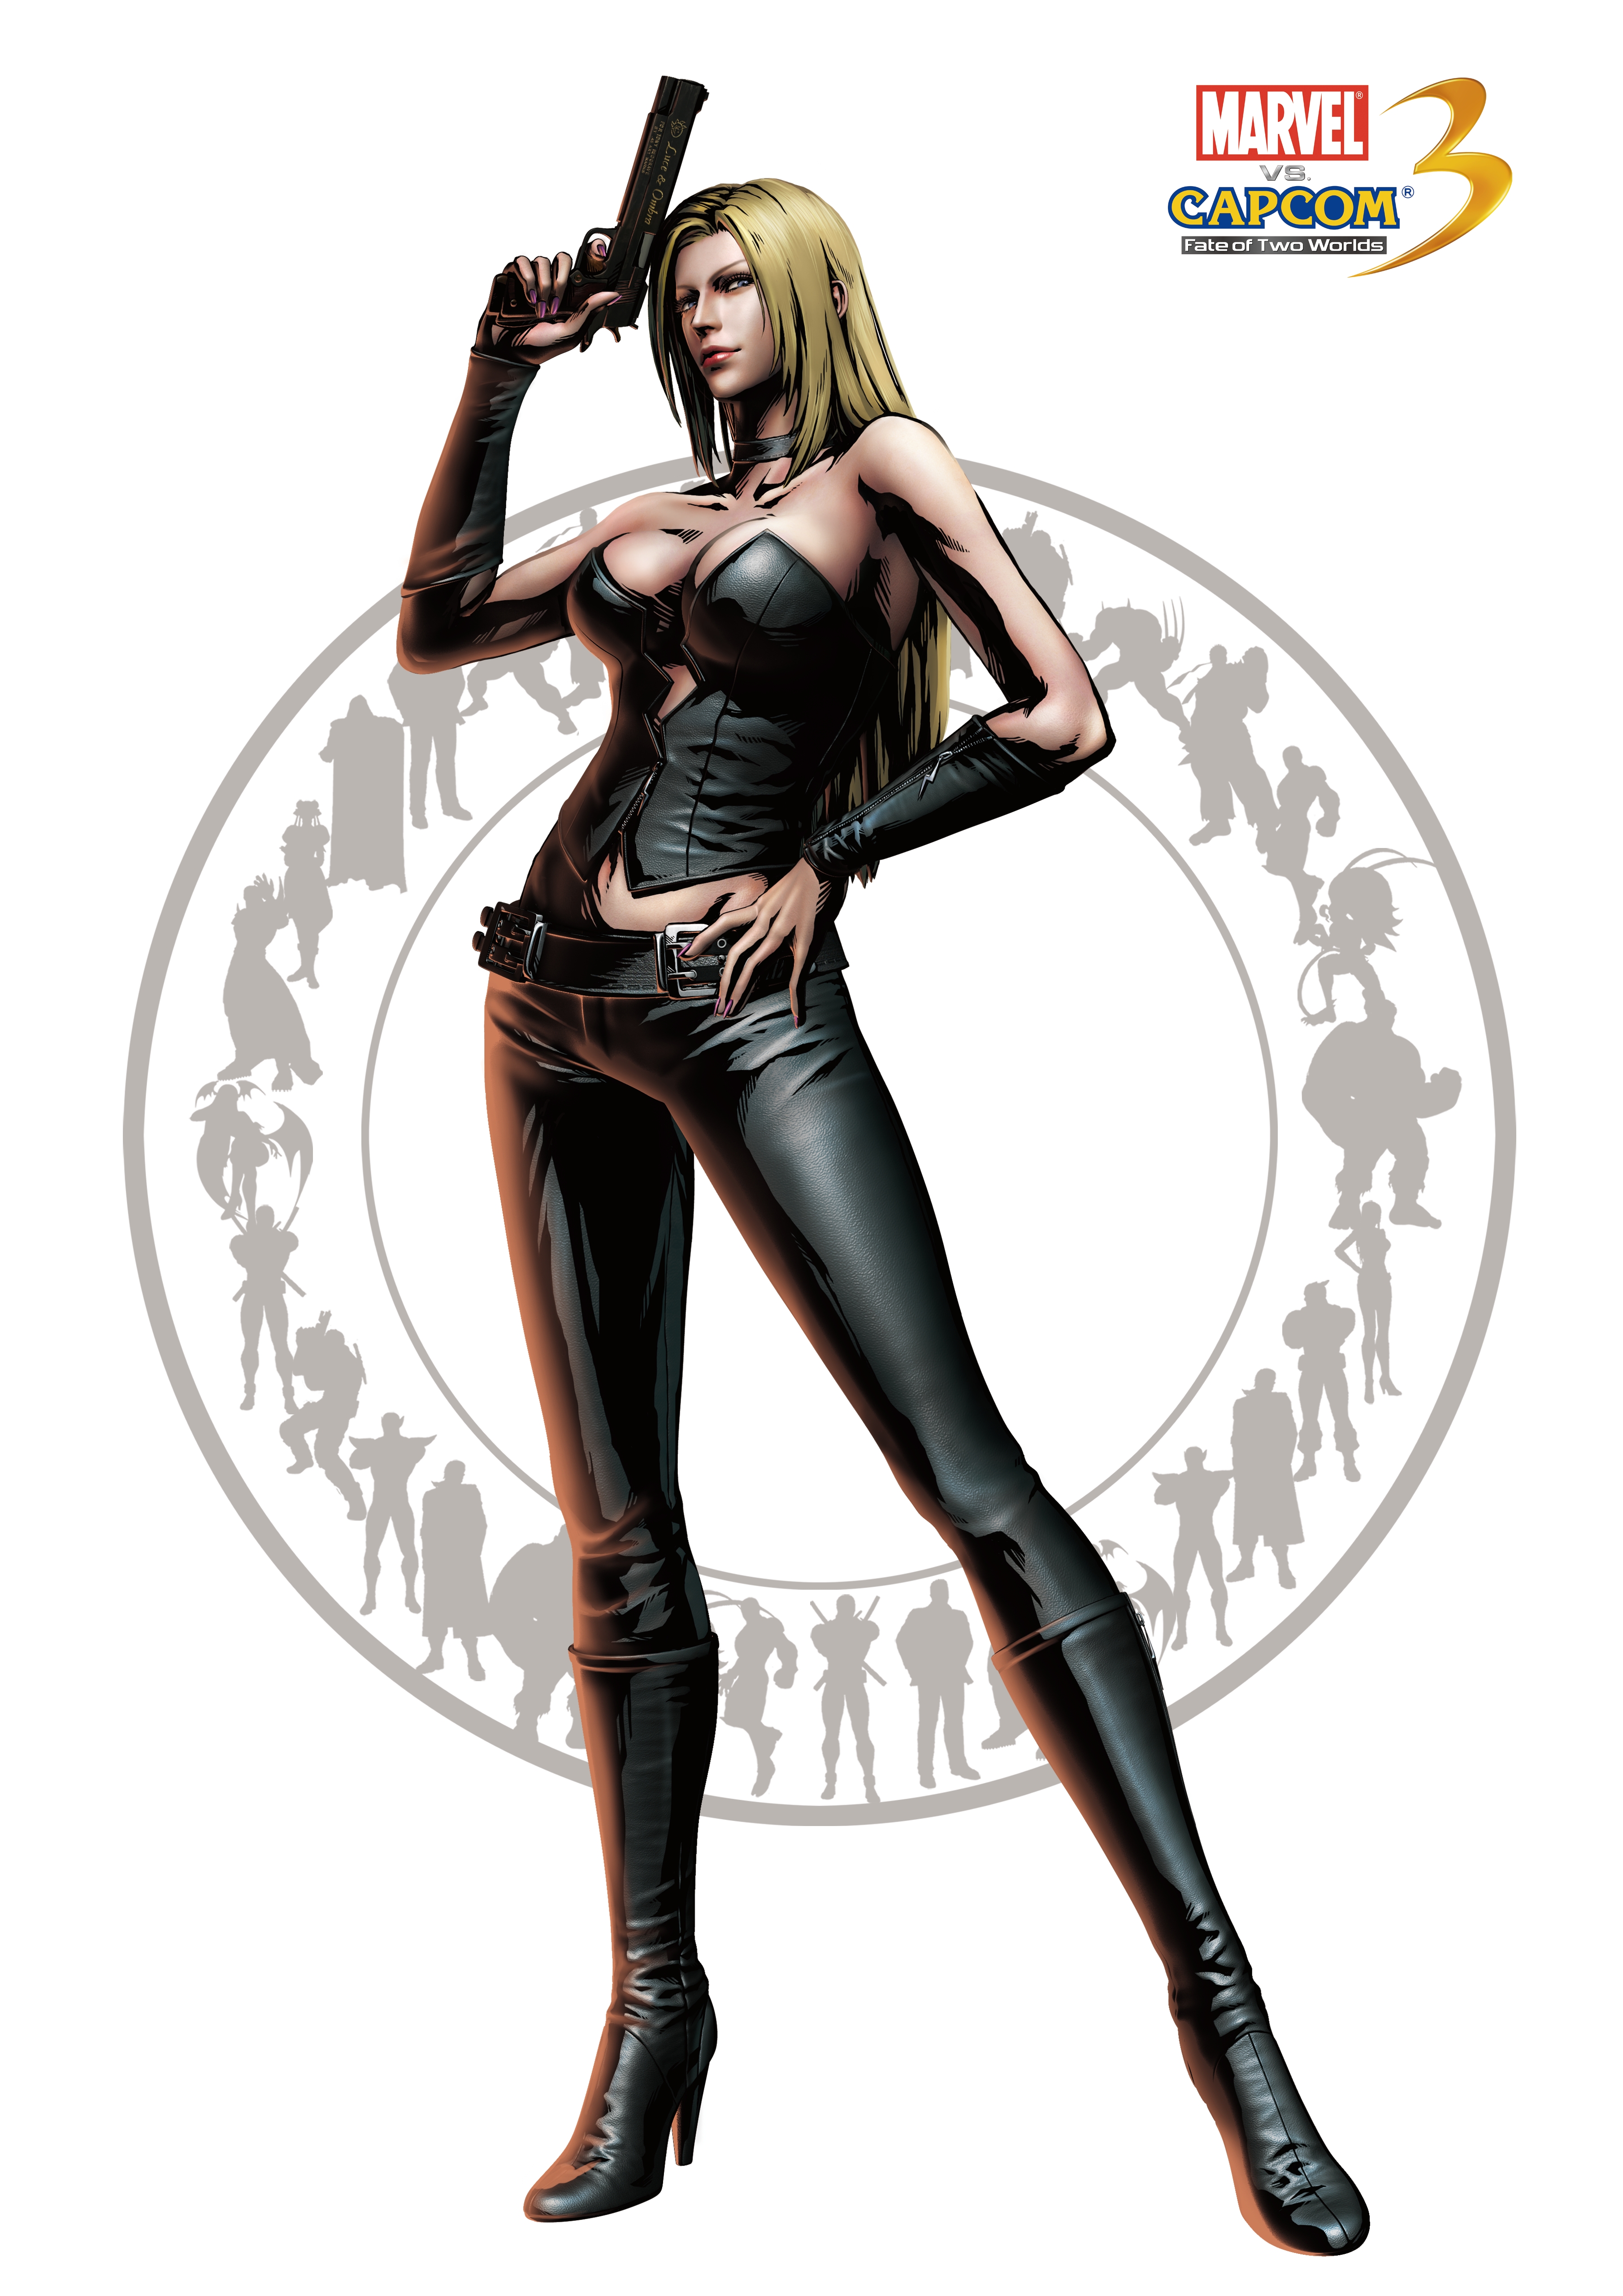 blondes, women, Devil May Cry, girls with guns, Trish Devil May Cry, Marvel vs Capcom, leather pants - desktop wallpaper